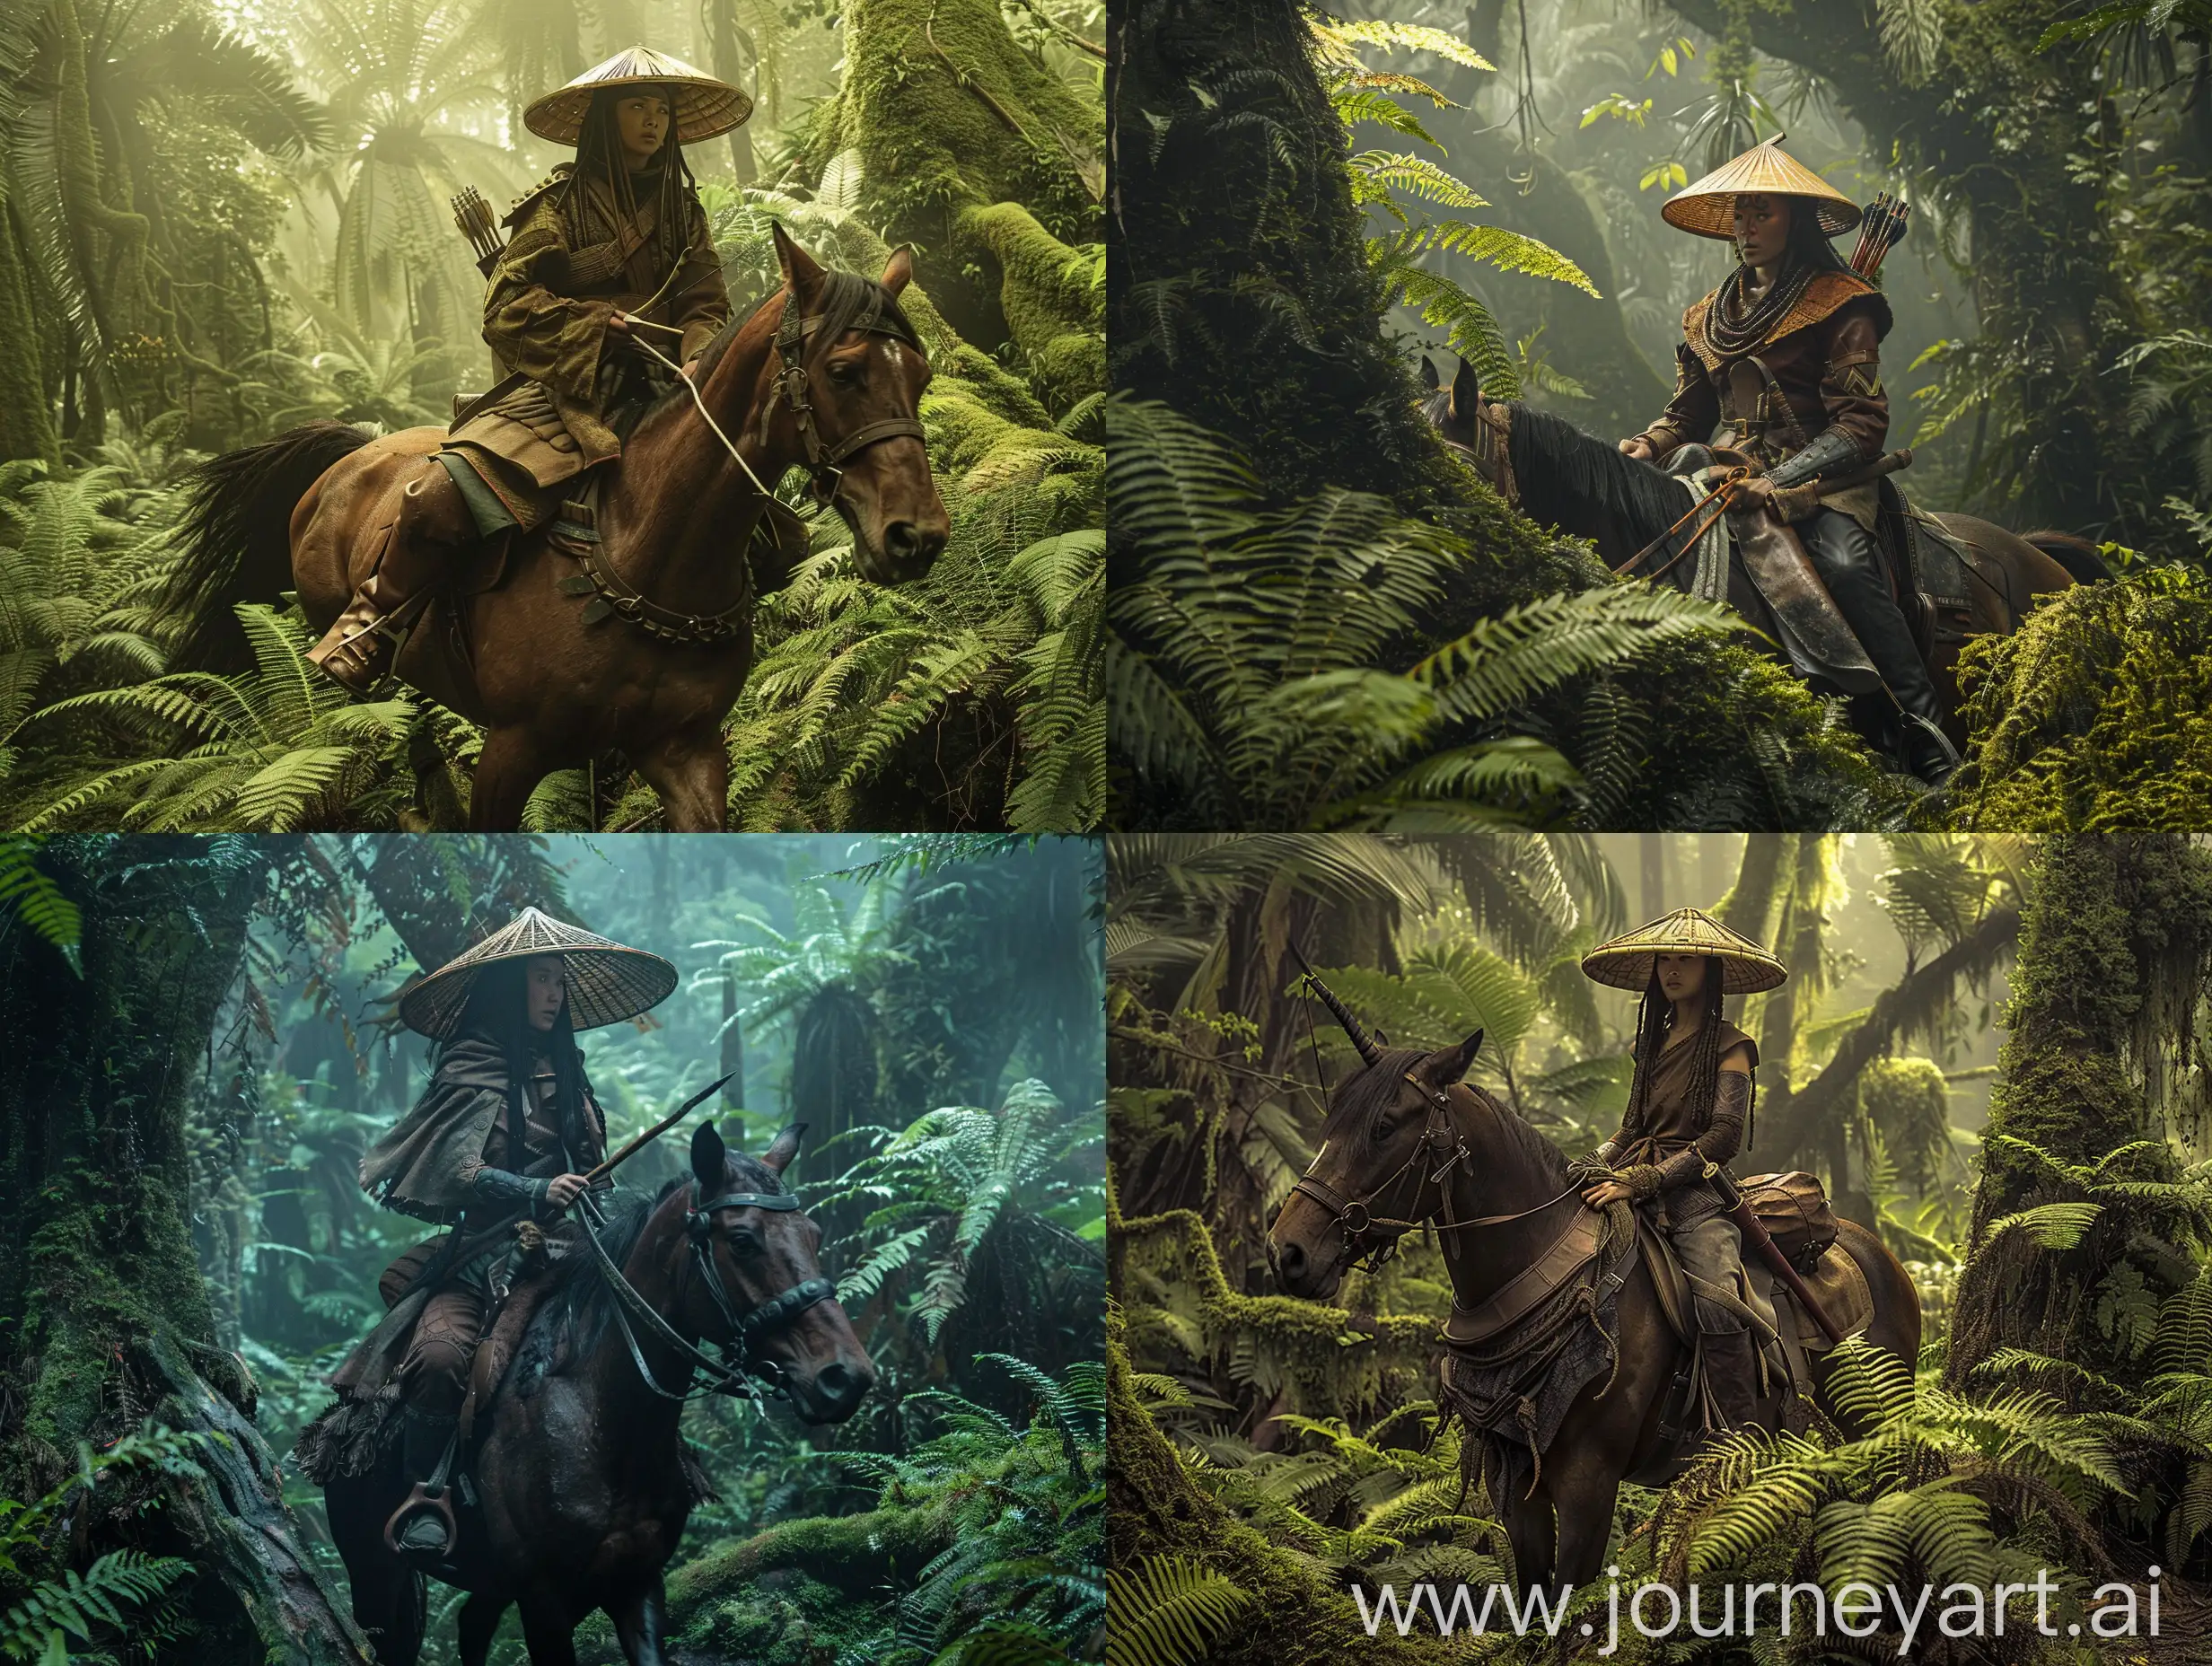 cinematic film,A Majapahit female warrior, wearing a bamboo hat, rides a horse through a dense forest with ferns and mossy trees. He wore leather clothing and carried a bow and arrow. movie scene, cinematic lighting, full body shot,